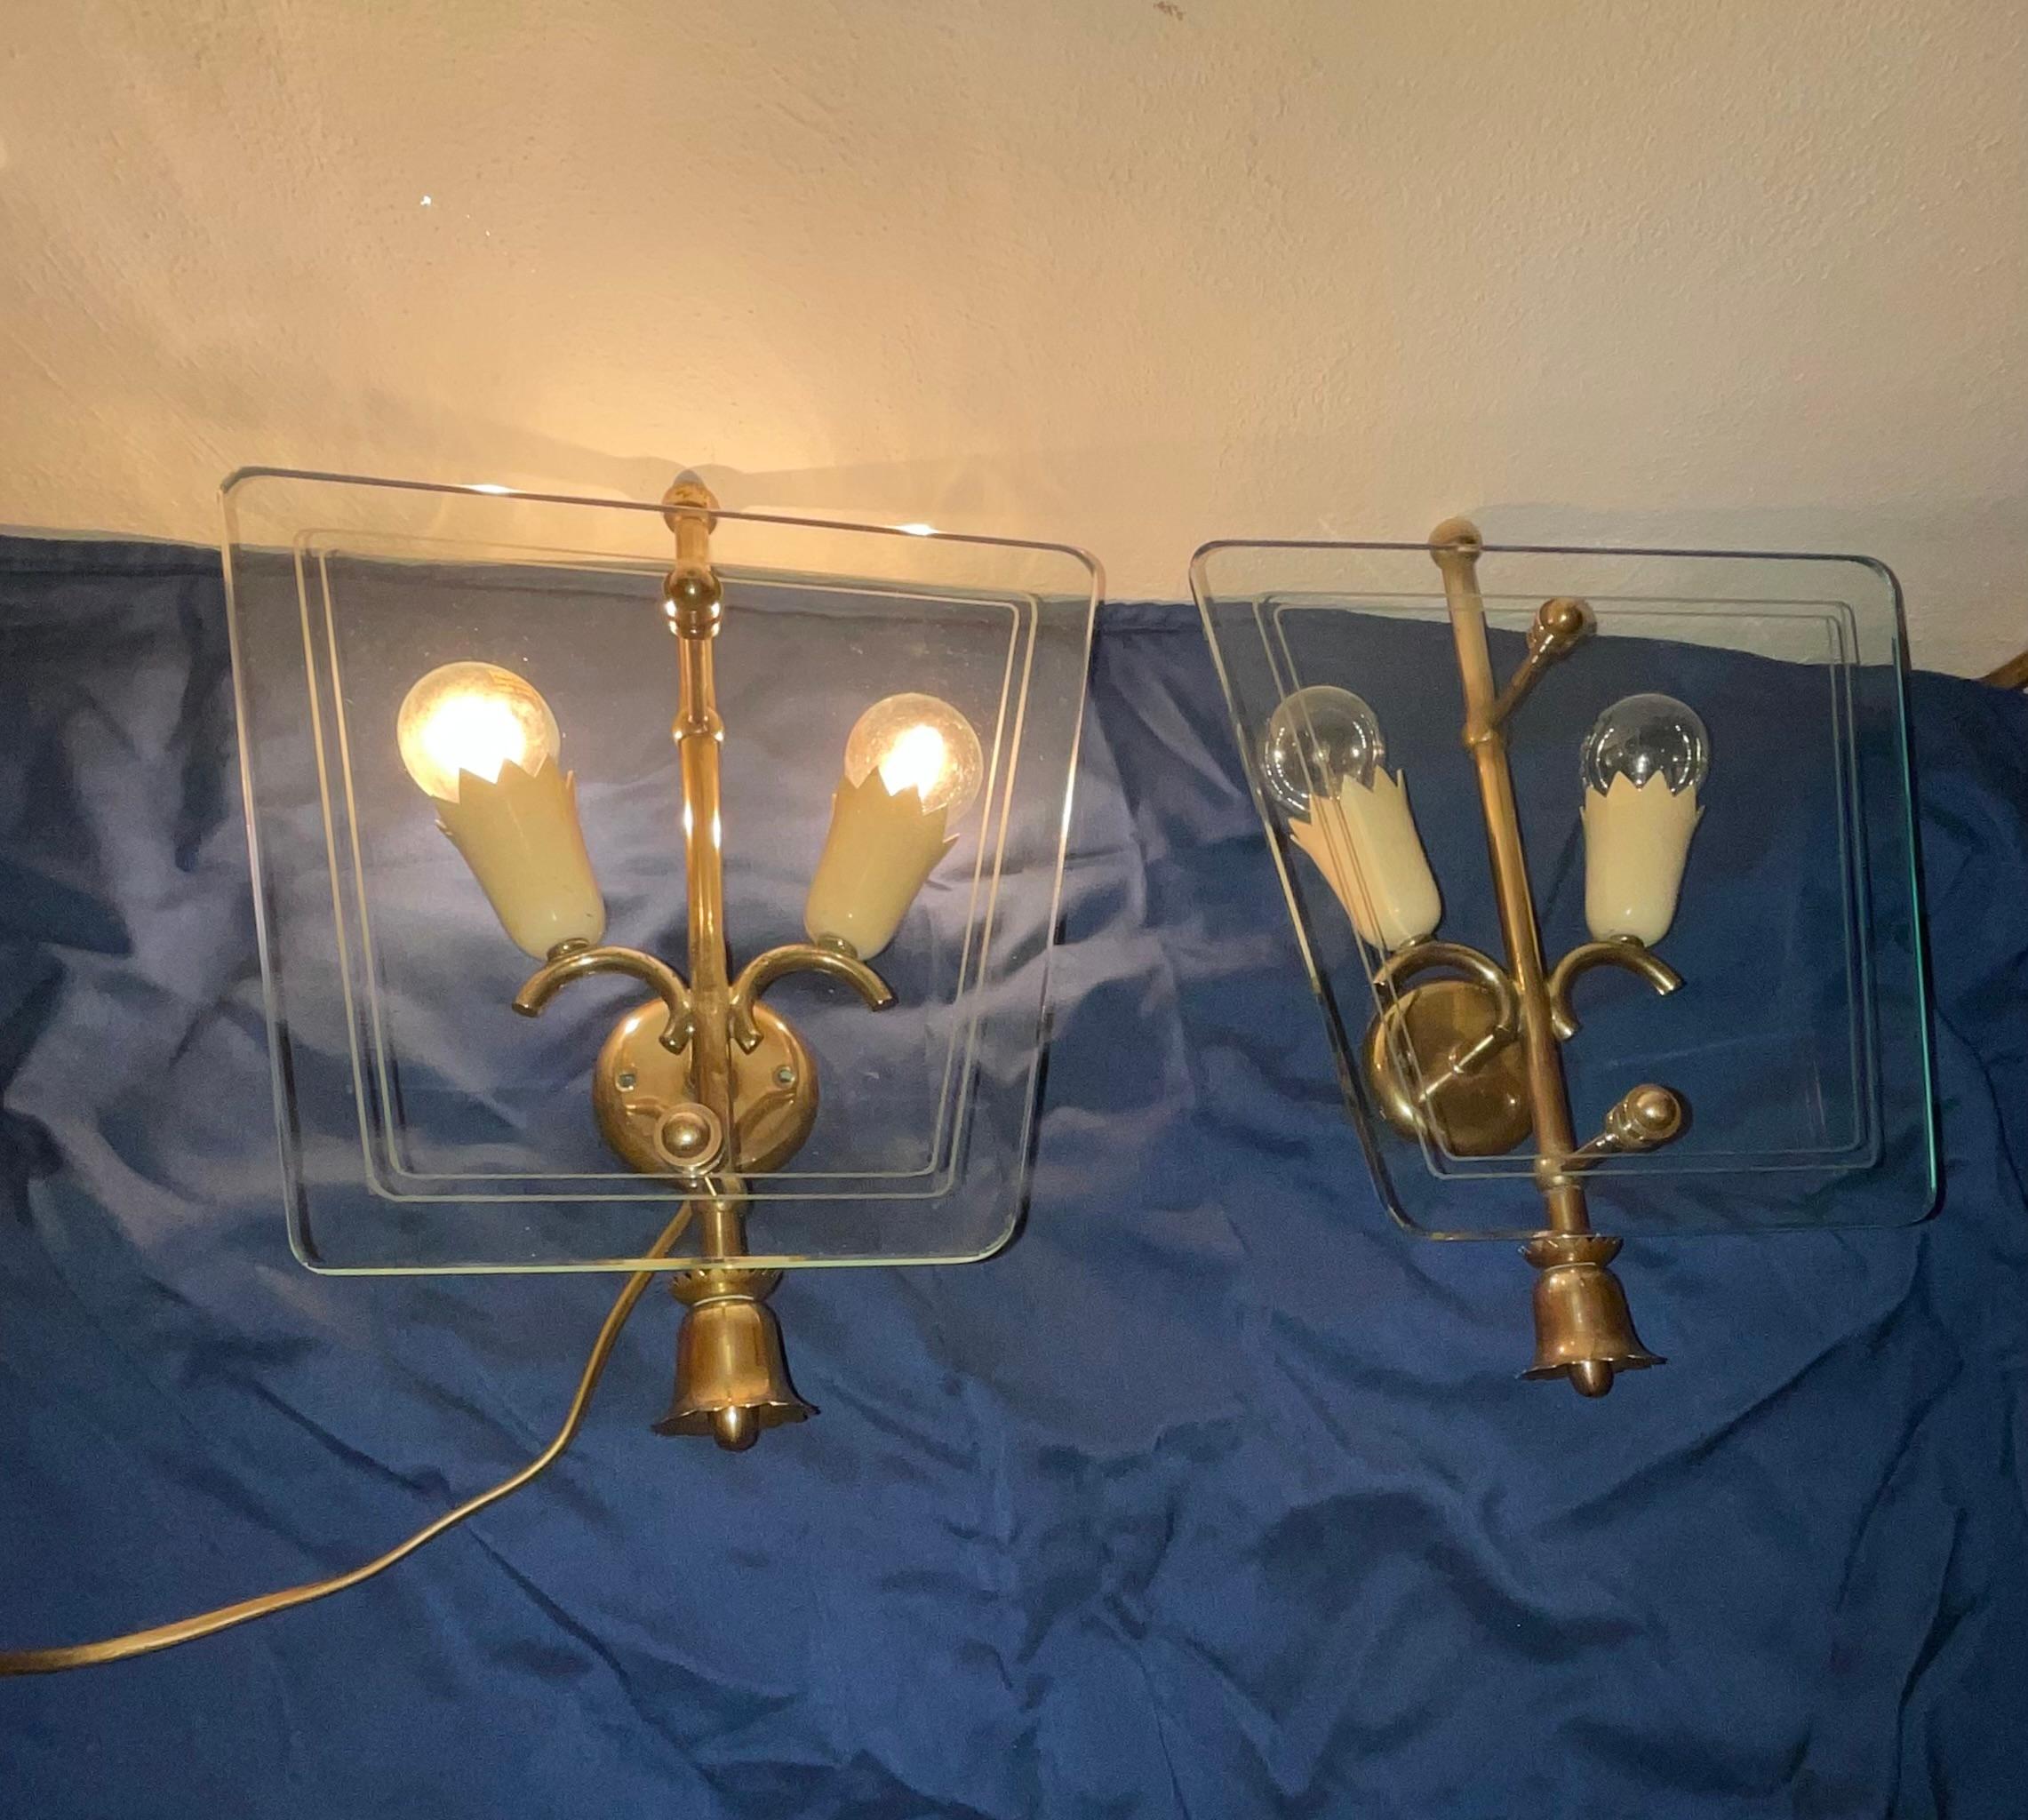 Pair of original wall sconces from the 1950s, from the quality of the brass and the elegant shape with wreath-like finials we can trace the designer who in this case was Pietro Chiesa , when he worked at Fontanarte where architect Gio Ponti was the